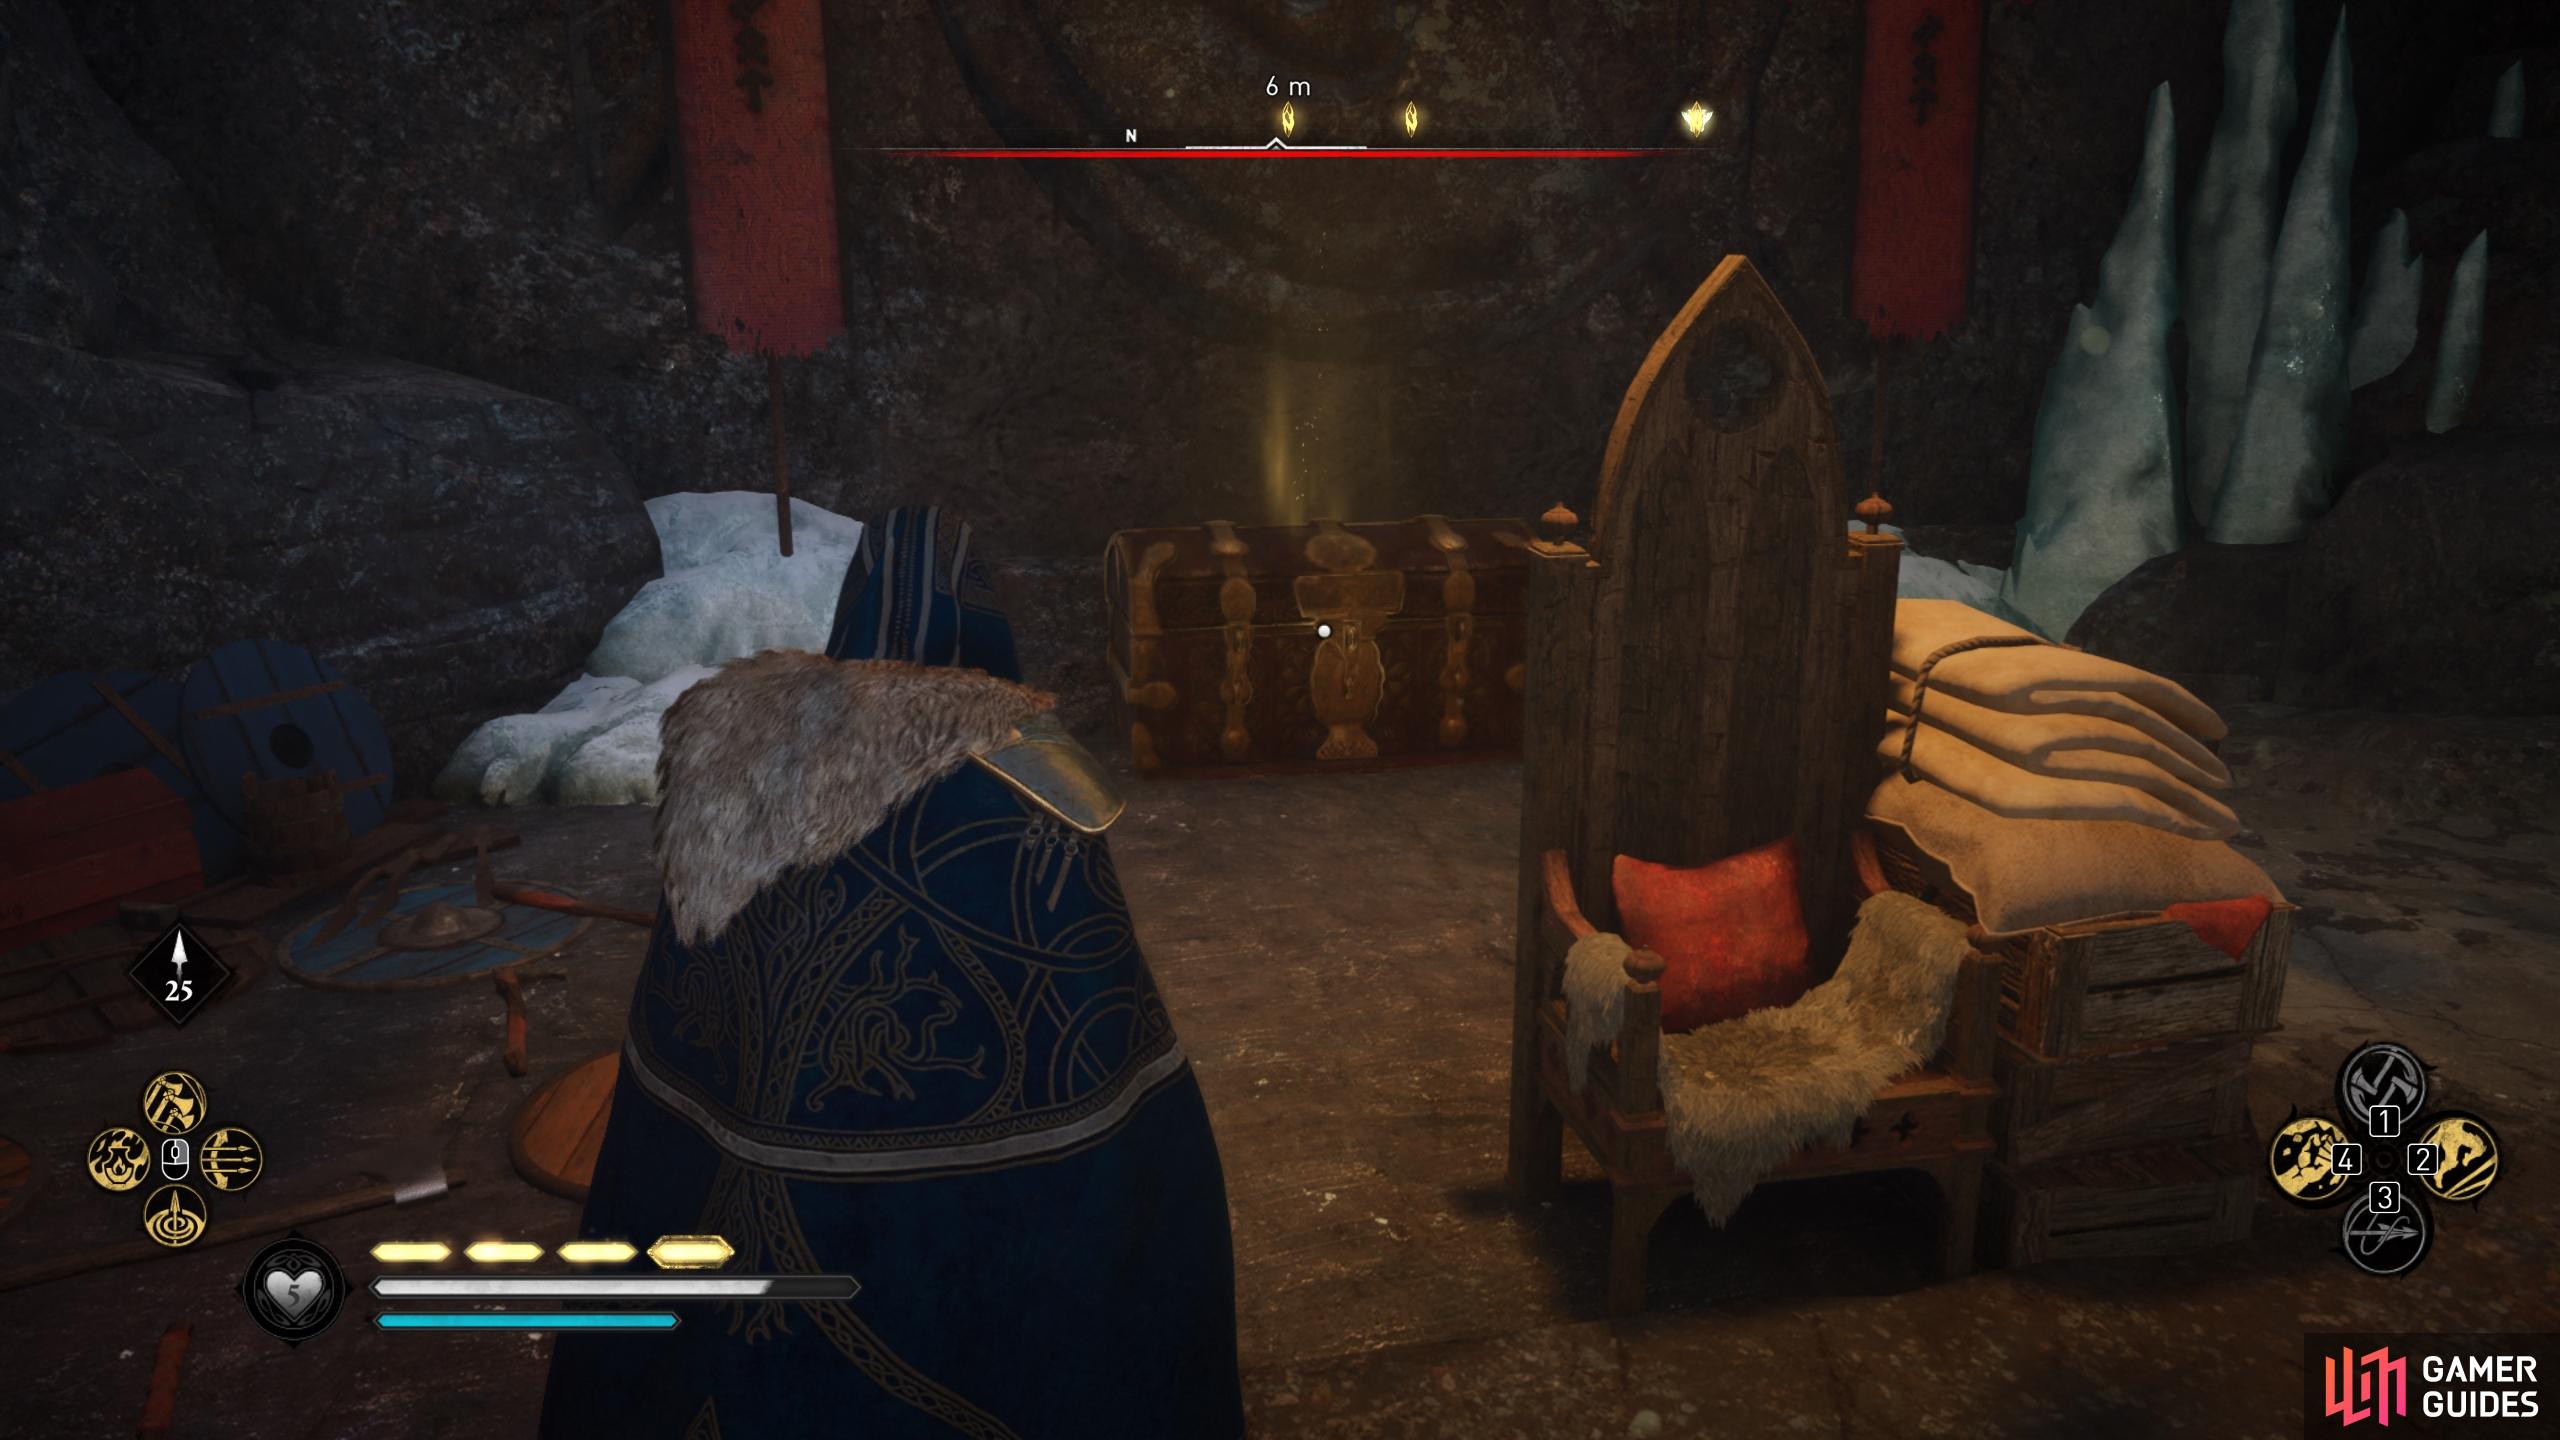 You'll find the chest behind a small throne.